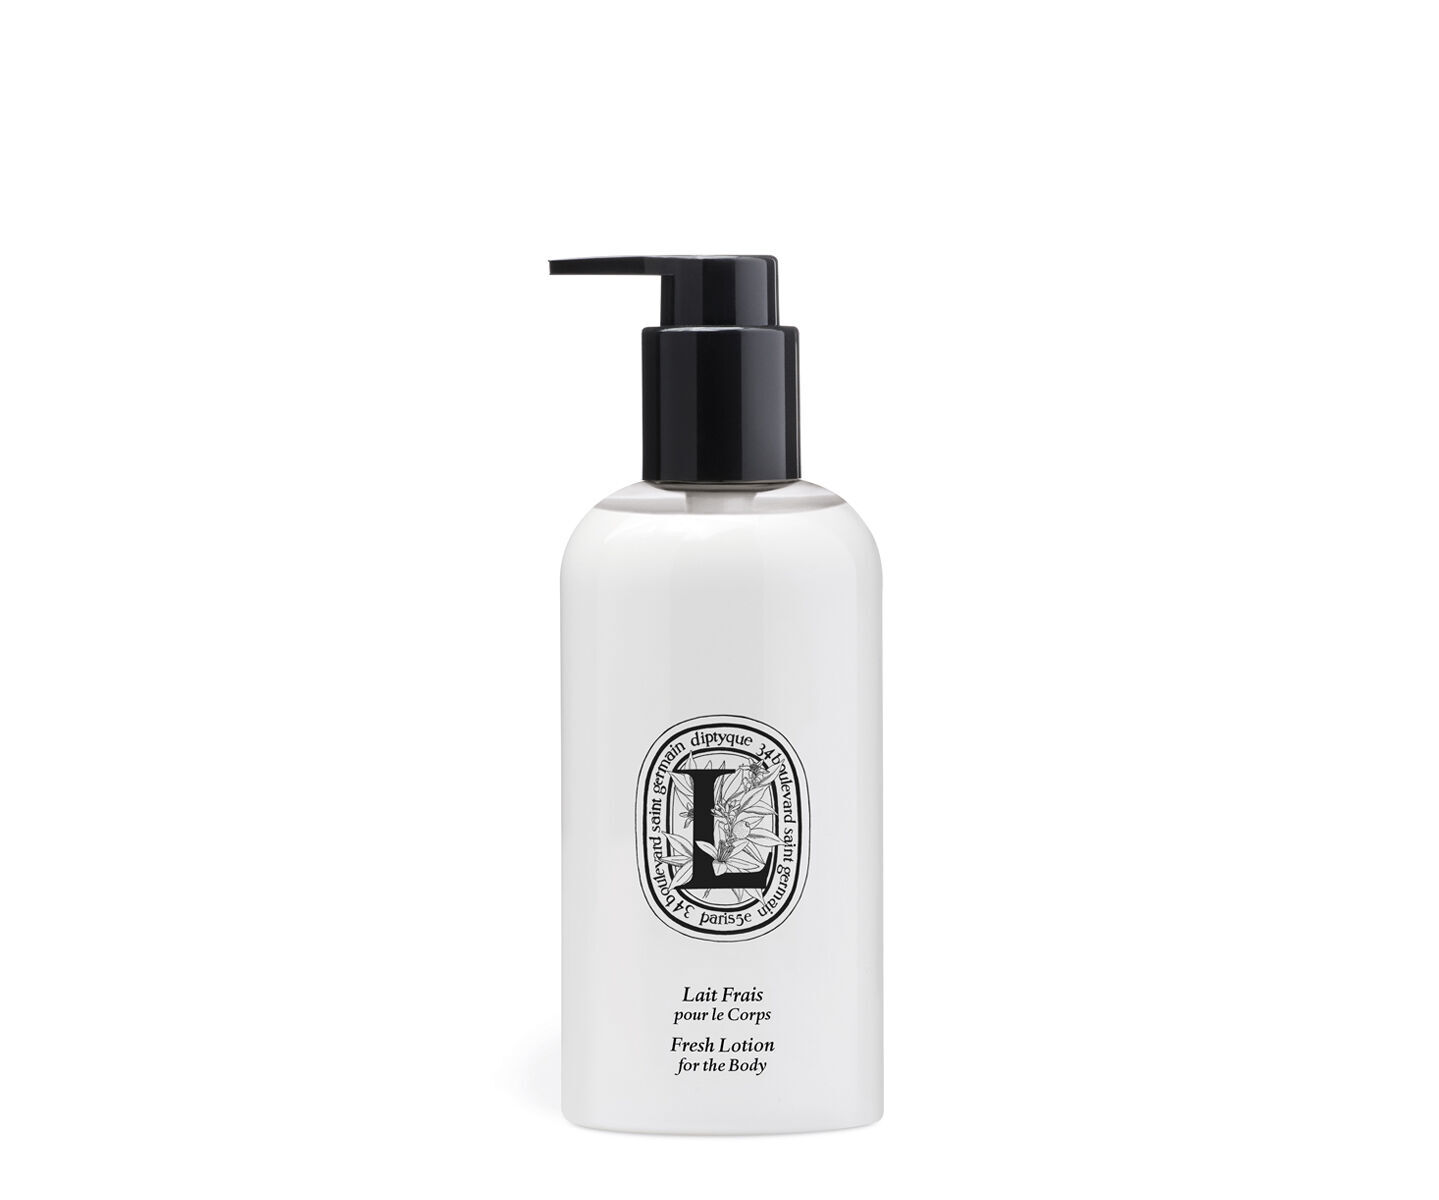 diptyque Fresh Lotion For The Body